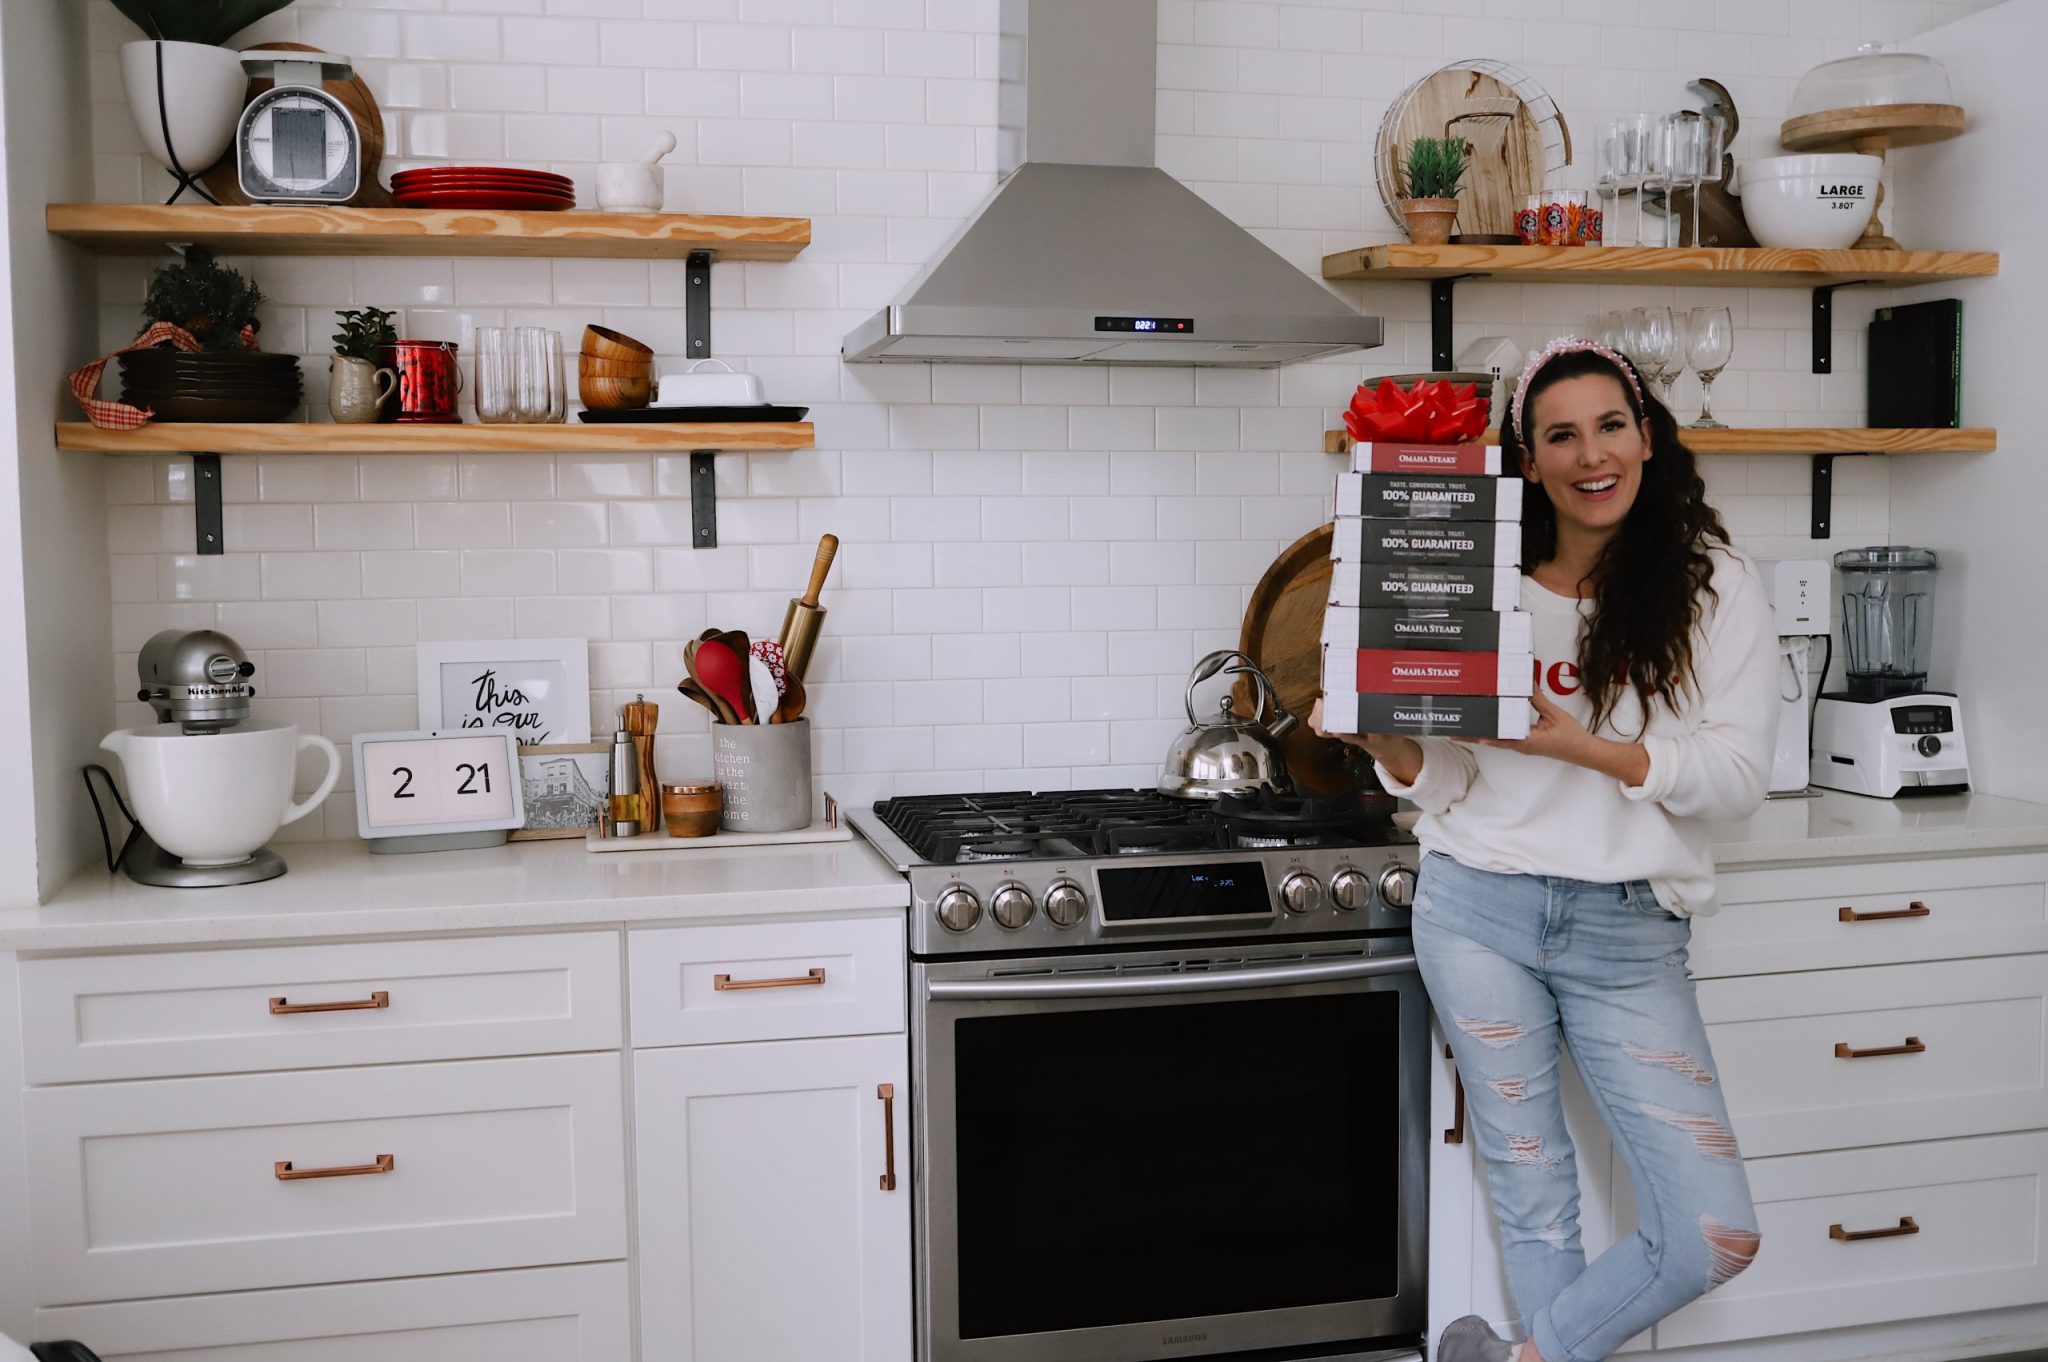 Omaha Steaks Gifts by popular Florida lifestyle blog, Fresh Mommy Blog: image of Tabitha Blue standing in her kitchen and holding a stack of Omaha Steaks boxes. 